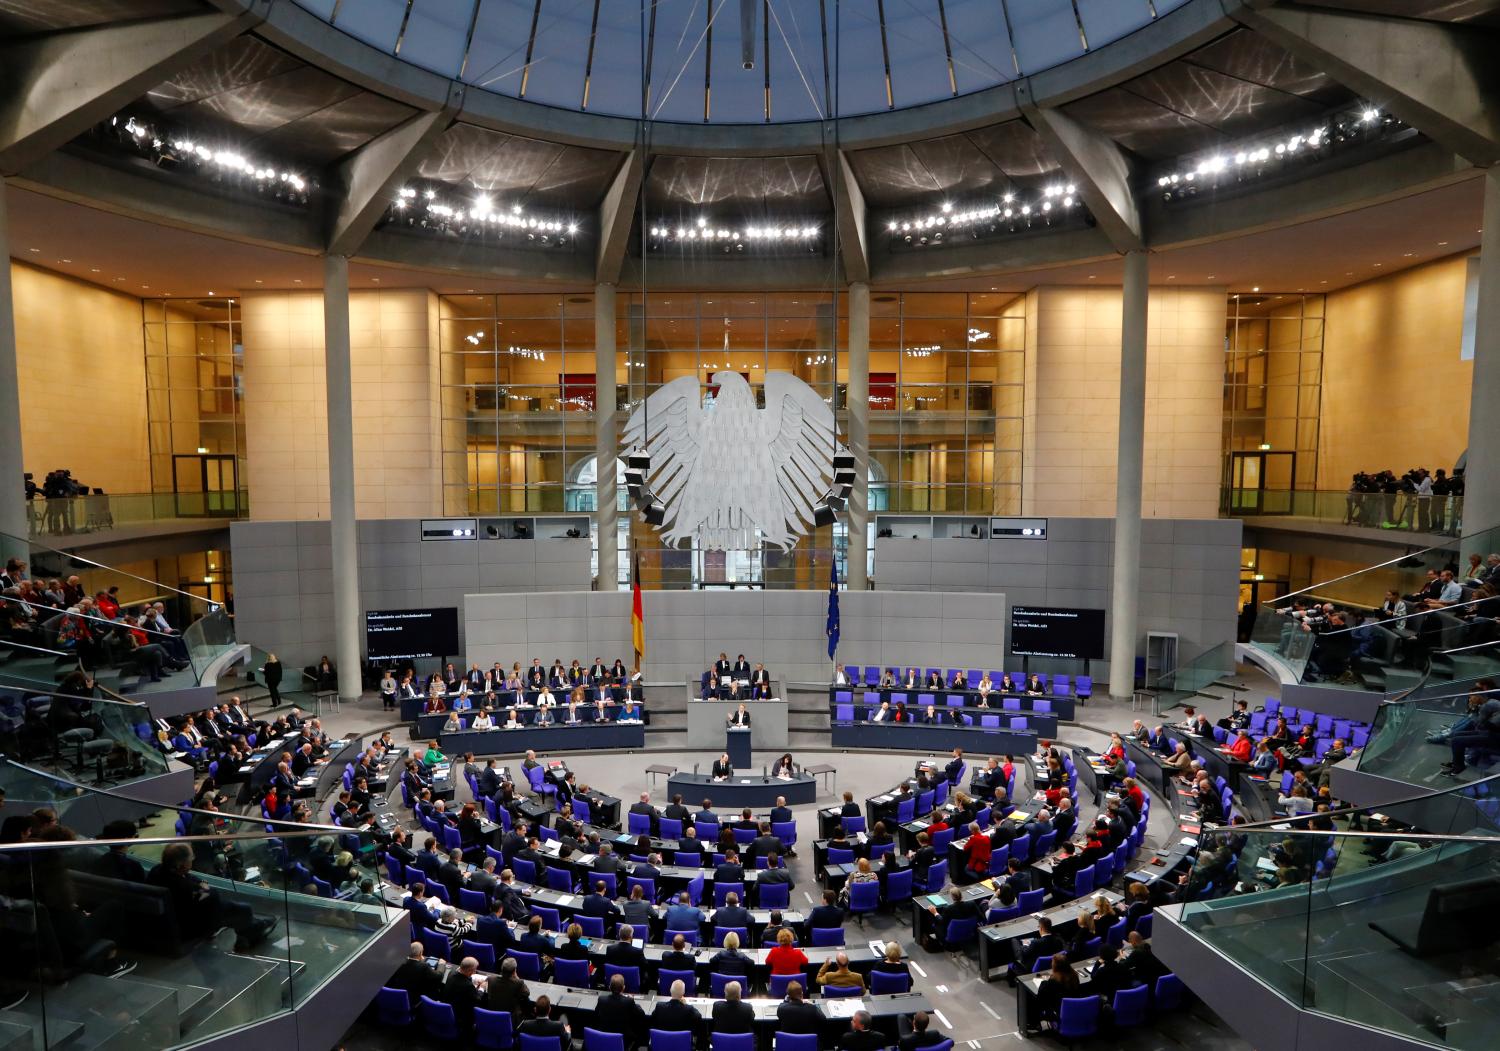 Alice Weidel of Alternative for Germany (AfD) speaks during a session at the lower house of parliament Bundestag in Berlin, Germany November 21, 2018. REUTERS/Fabrizio Bensch - RC1A64D3ACF0